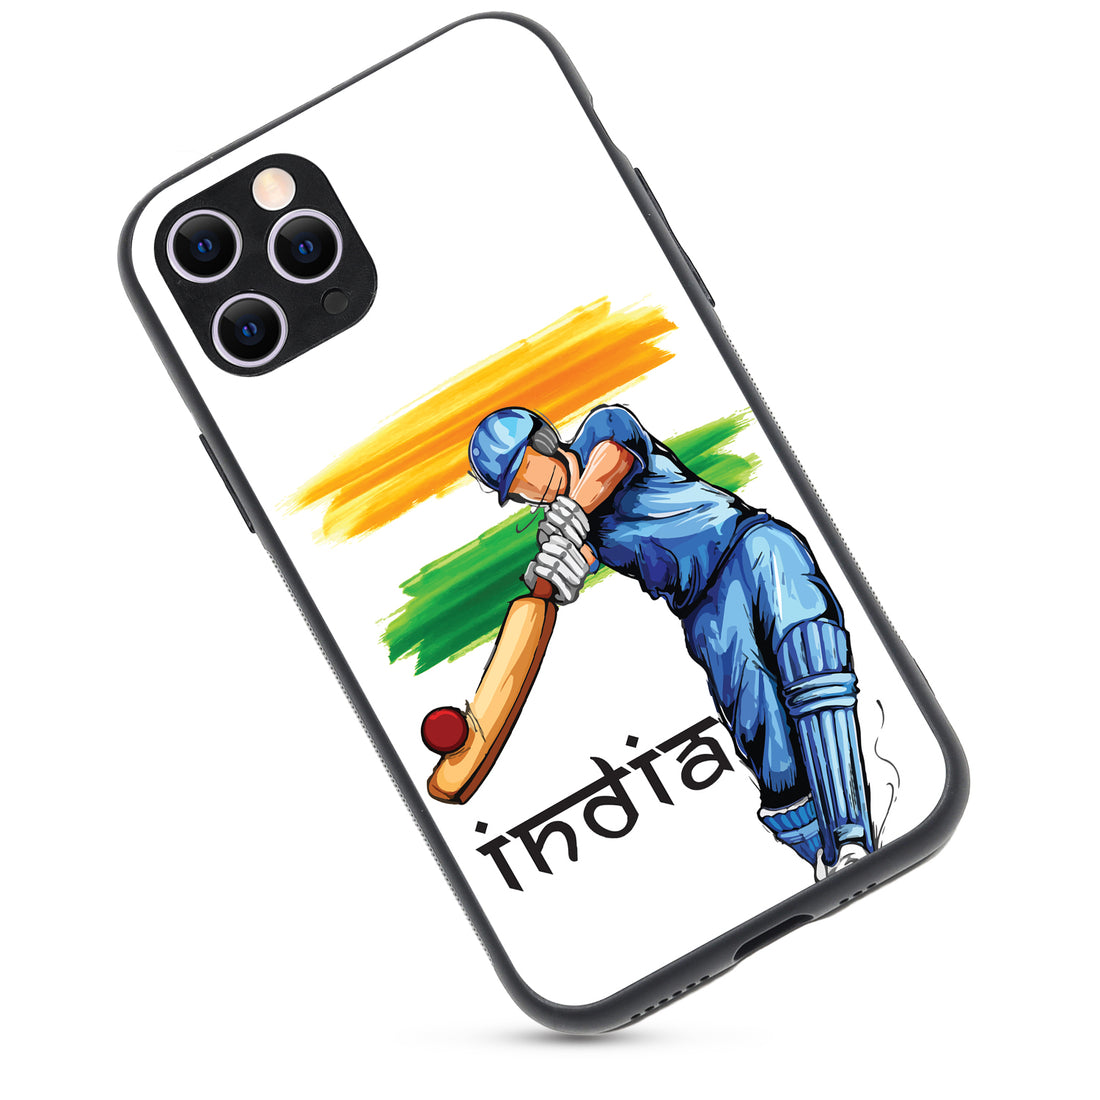 Indian Bold iPhone 11 Pro Case